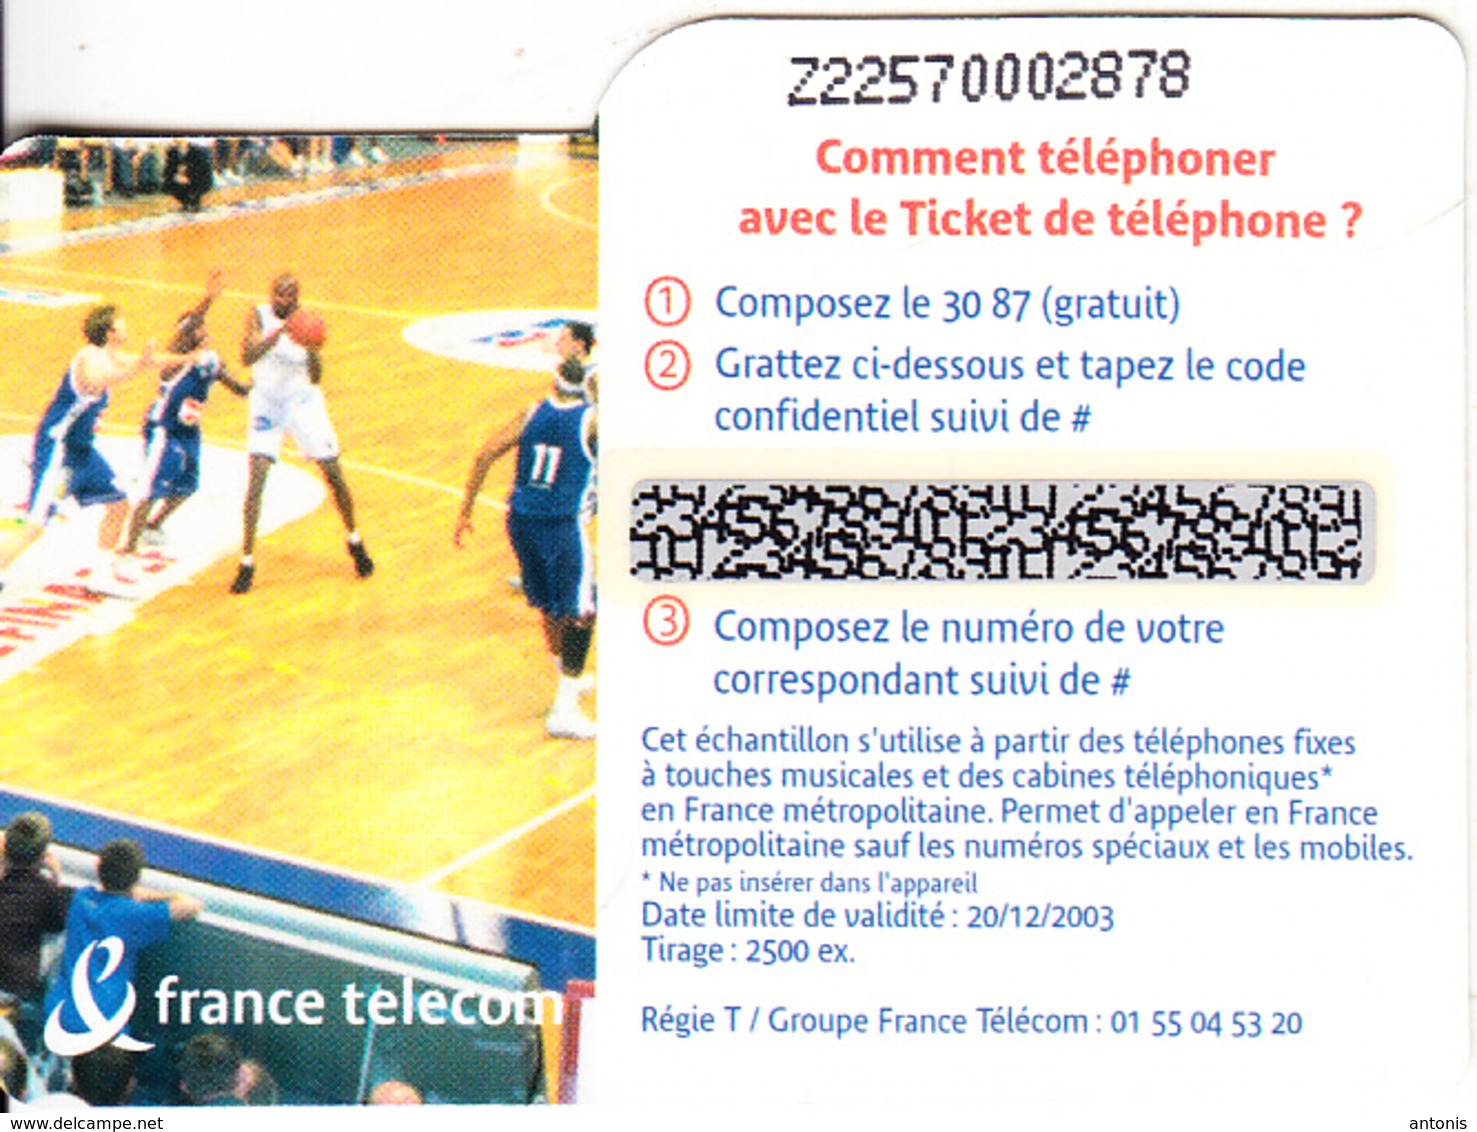 FRANCE - Basketball, BCM/Gravelines Dunkerque, FT Promotion Prepaid Card, Tirage 2500, Exp.date 20/12/03, Mint - Biglietti FT